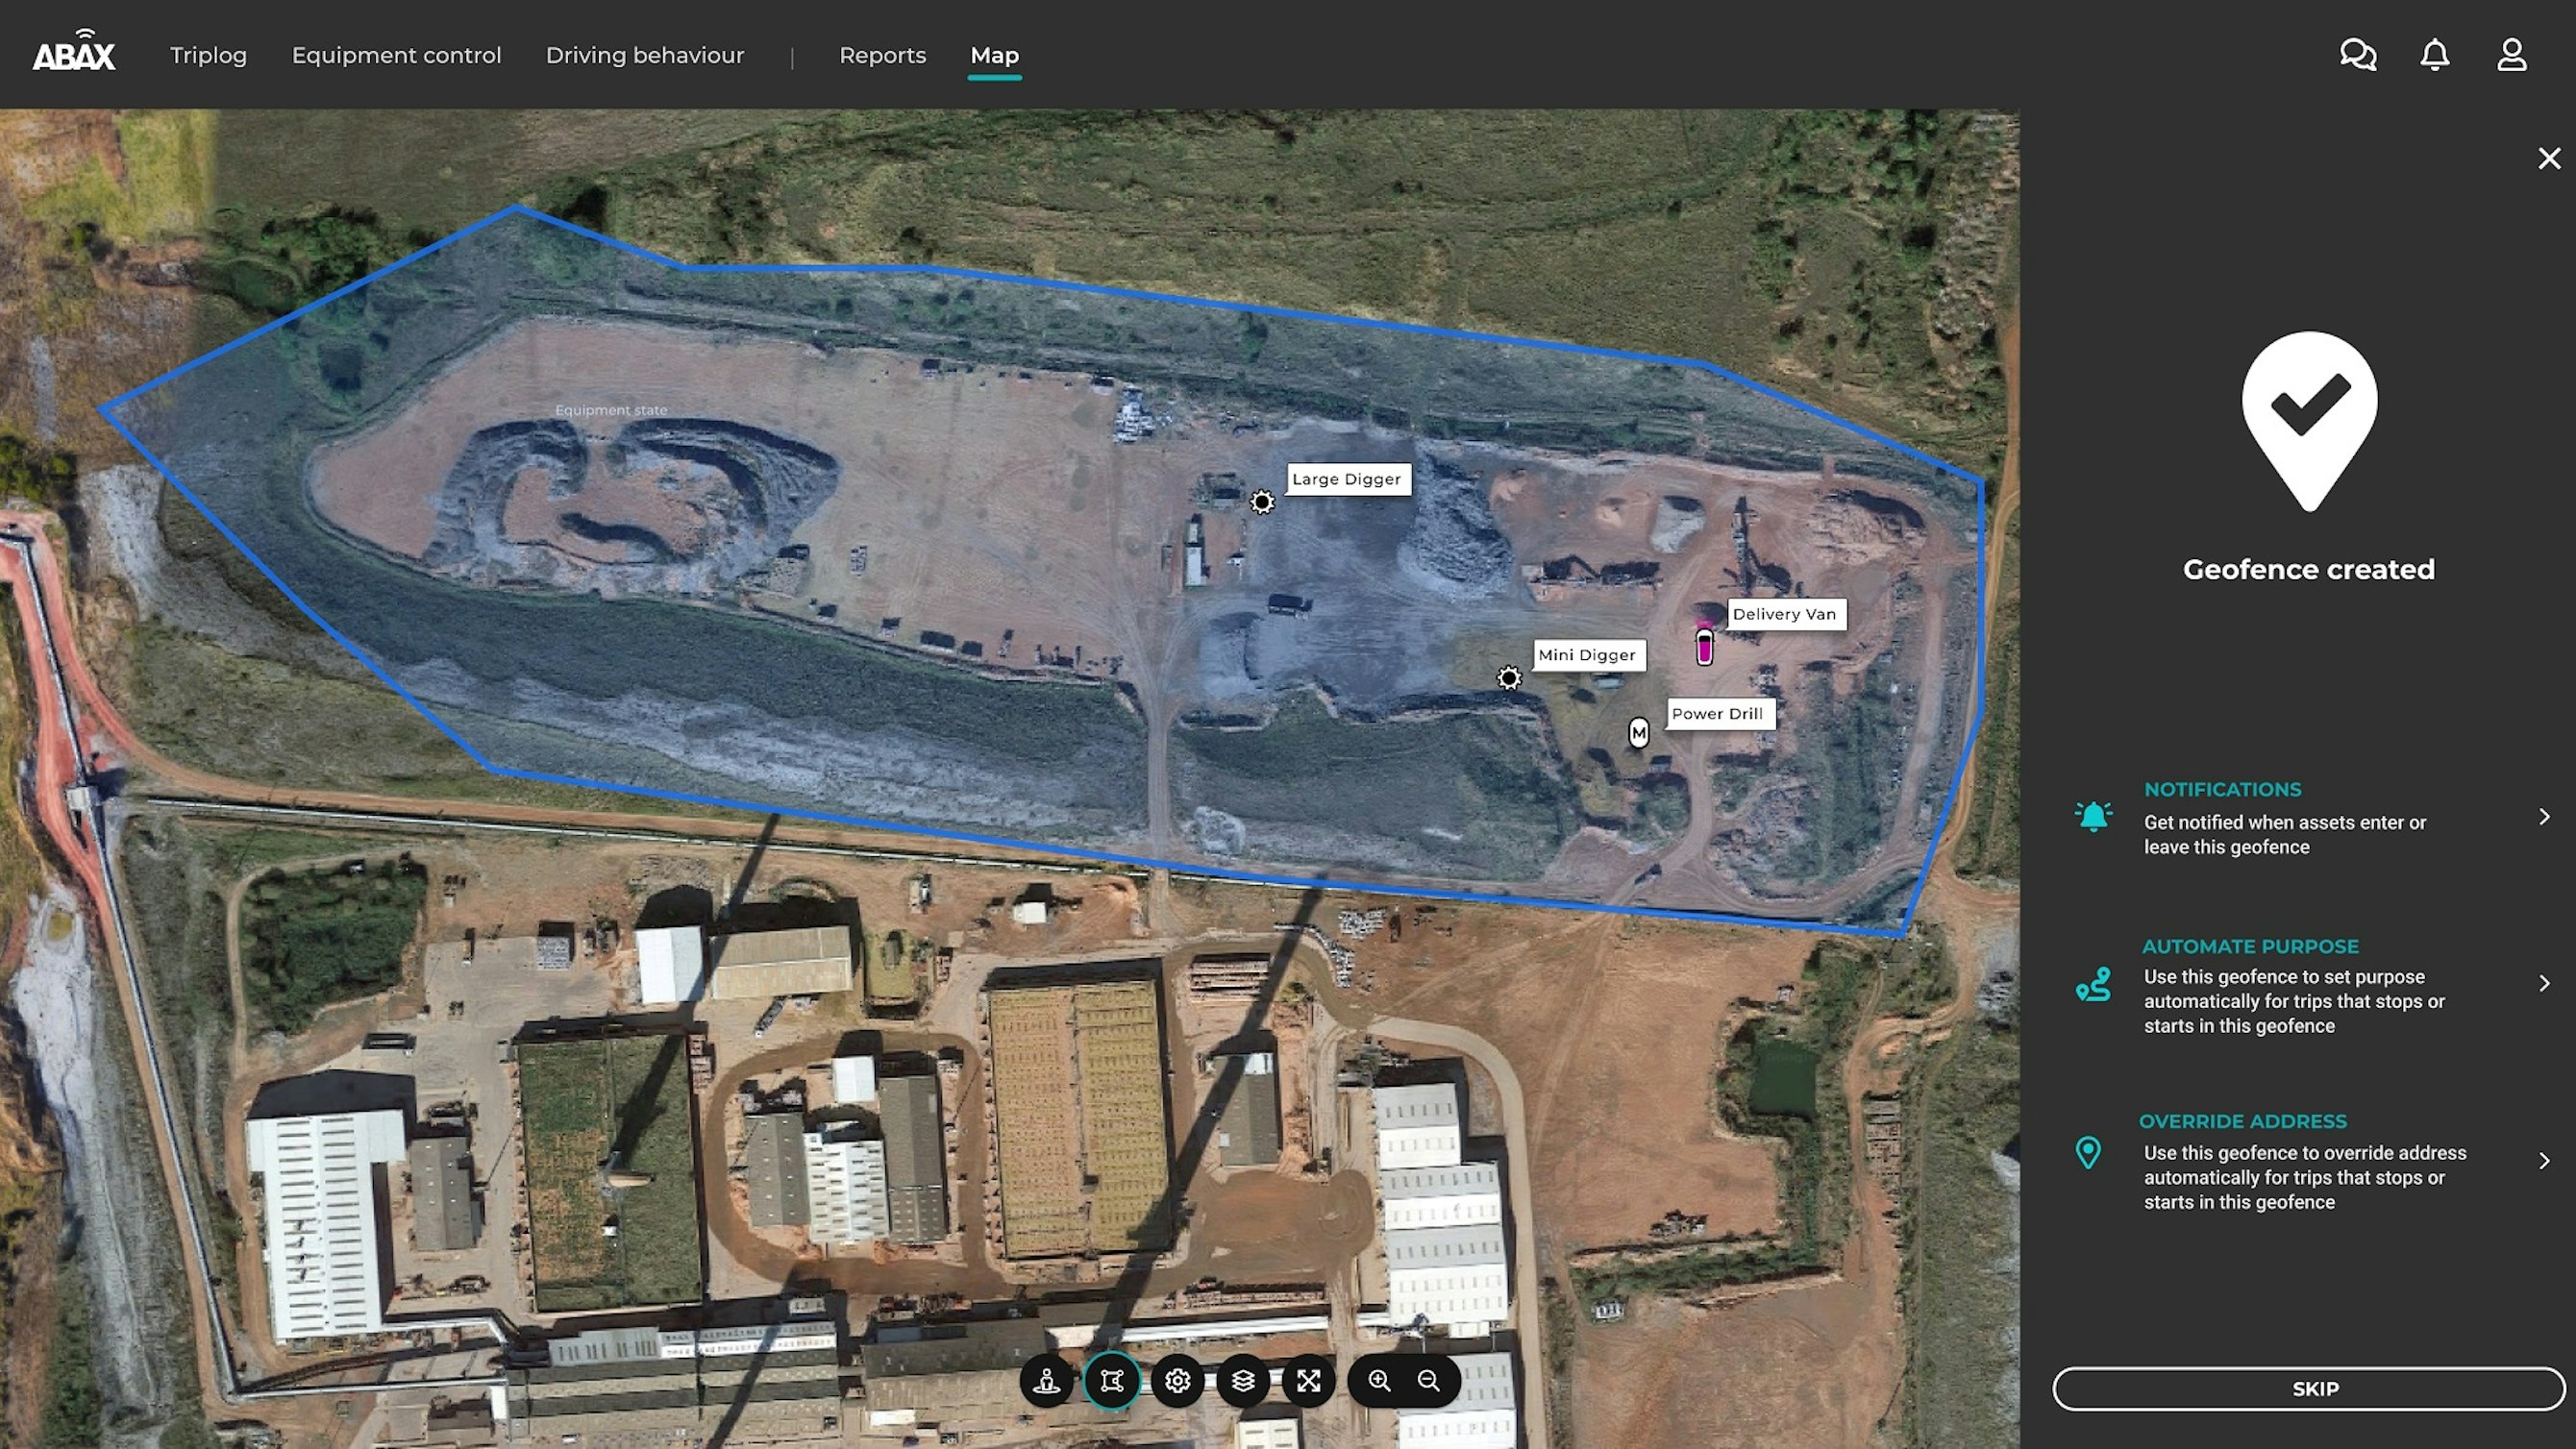 NEW ABAX GEOFENCE MONITORS ALL TYPES OF ASSETS TO PROTECT AND IMPROVE OPERATIONS